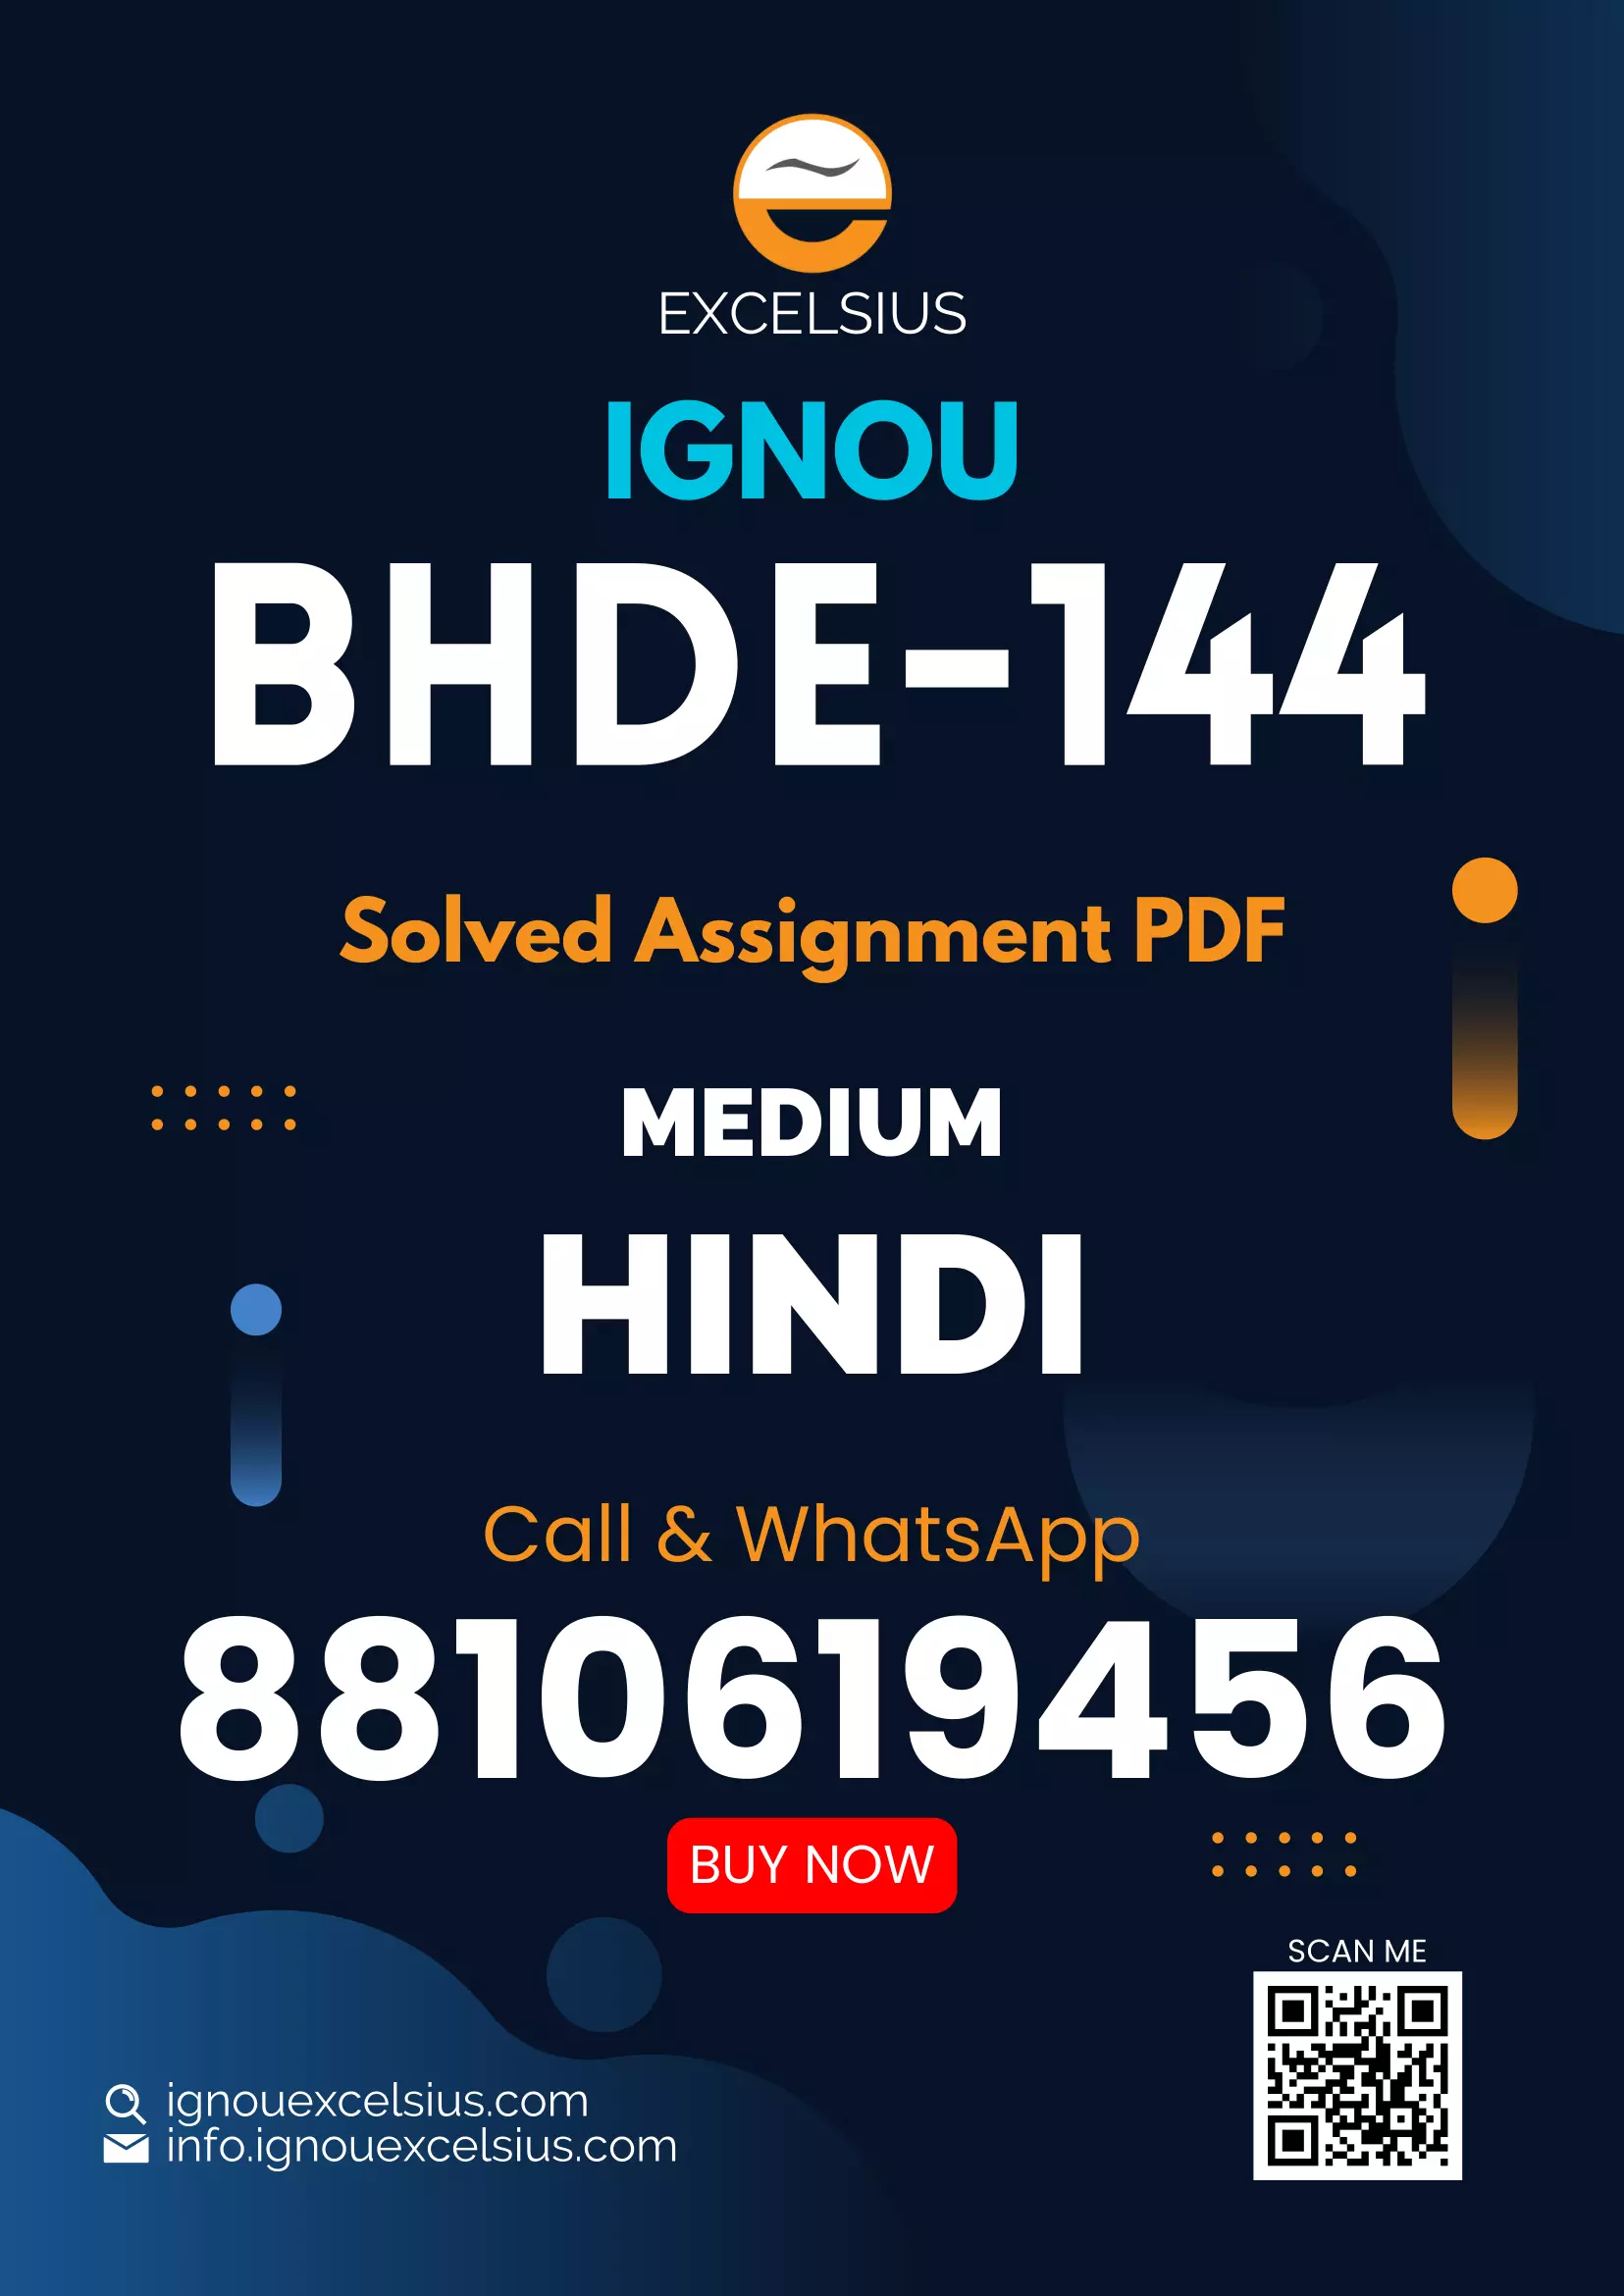 IGNOU BHDE-144 - Chhayavad, Latest Solved Assignment-January 2023 - July 2023